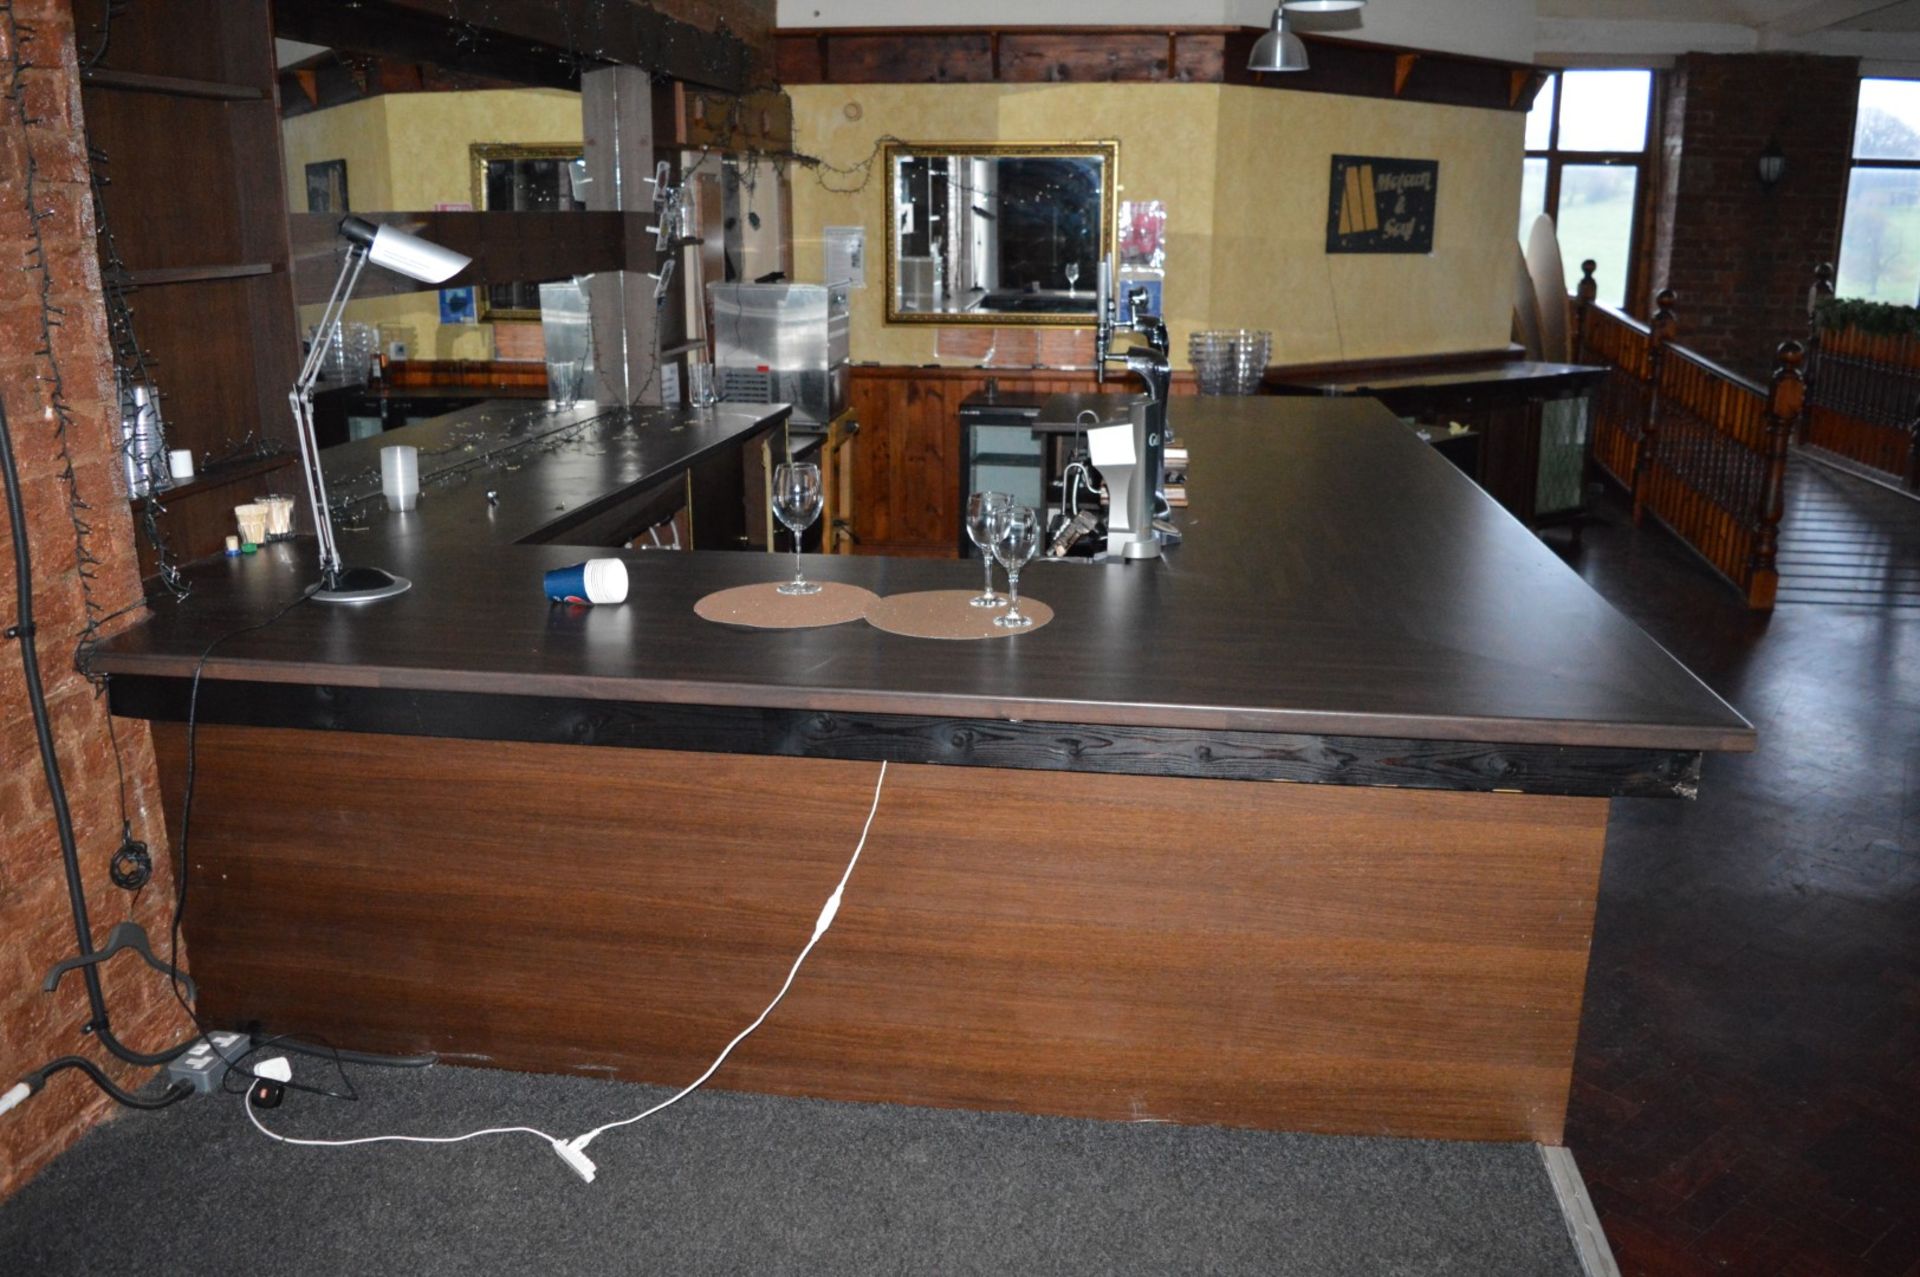 1 x Pub / Restaurant Bar With Walnut Coloured Tops, Mirrored Backbar Unit and Four Suspended Light - Image 8 of 11